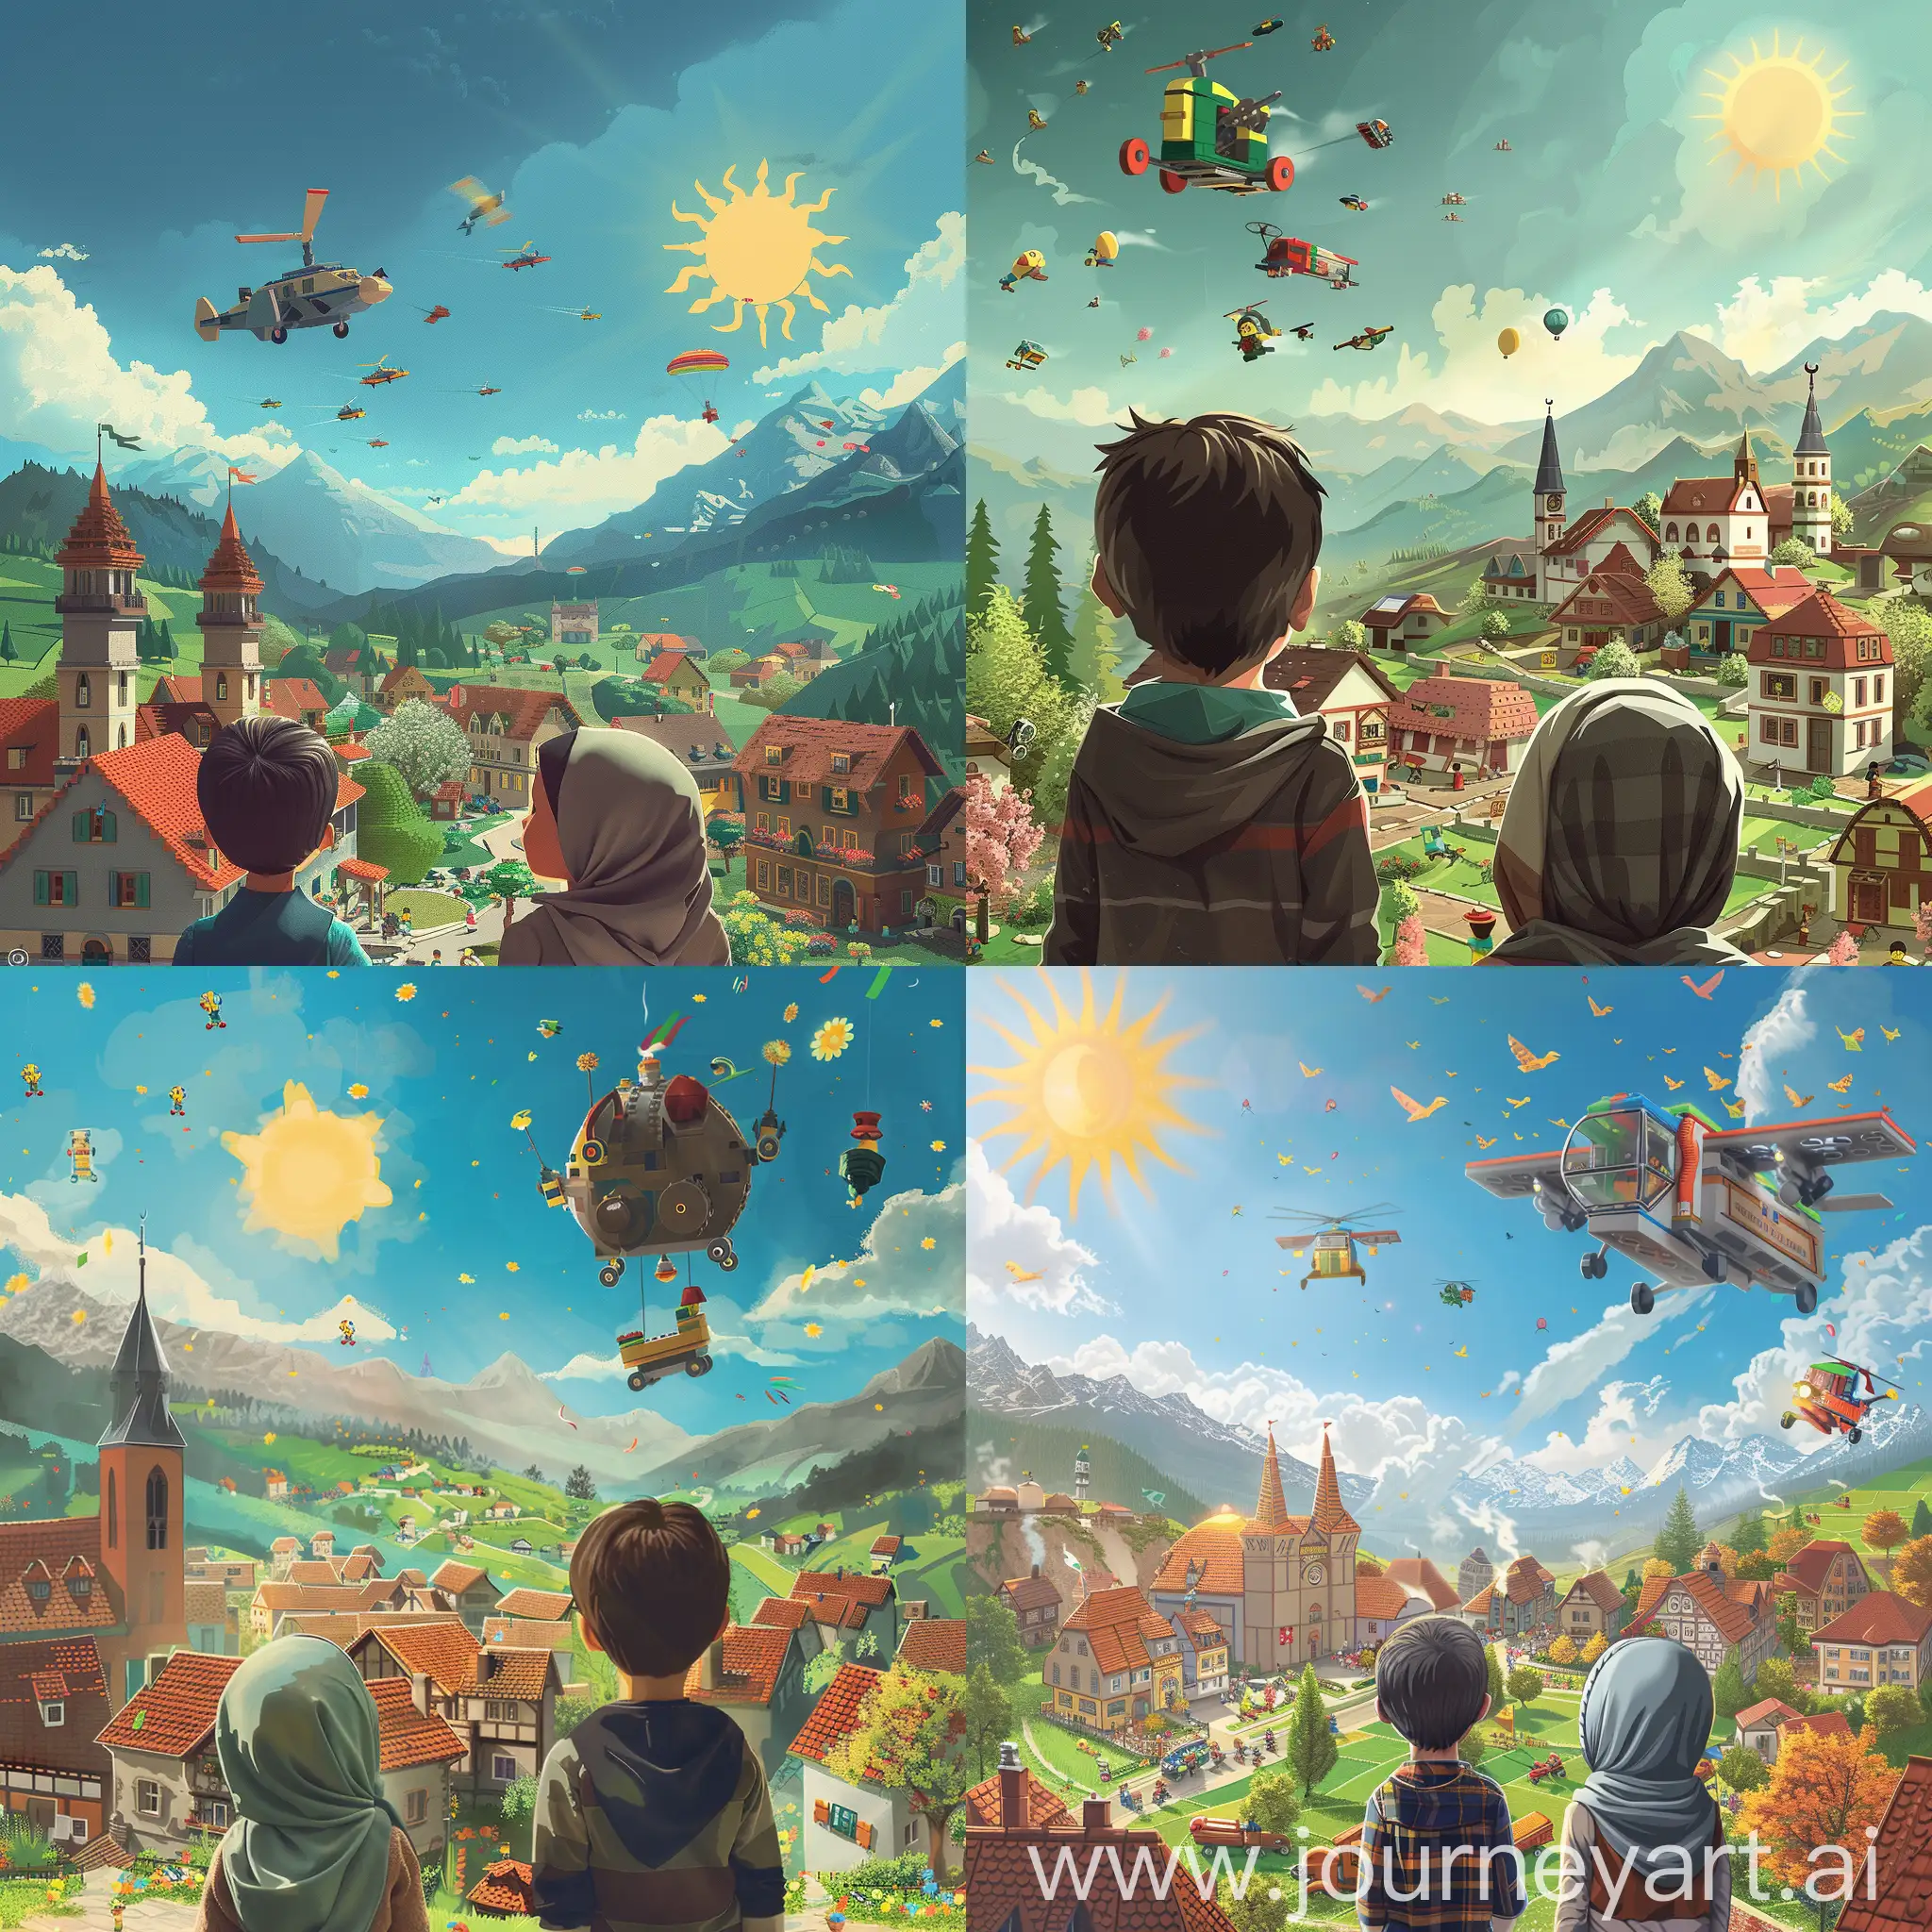 Children-in-Hijab-Admiring-Toy-Townscape-with-Flying-Toys-and-Mountain-View